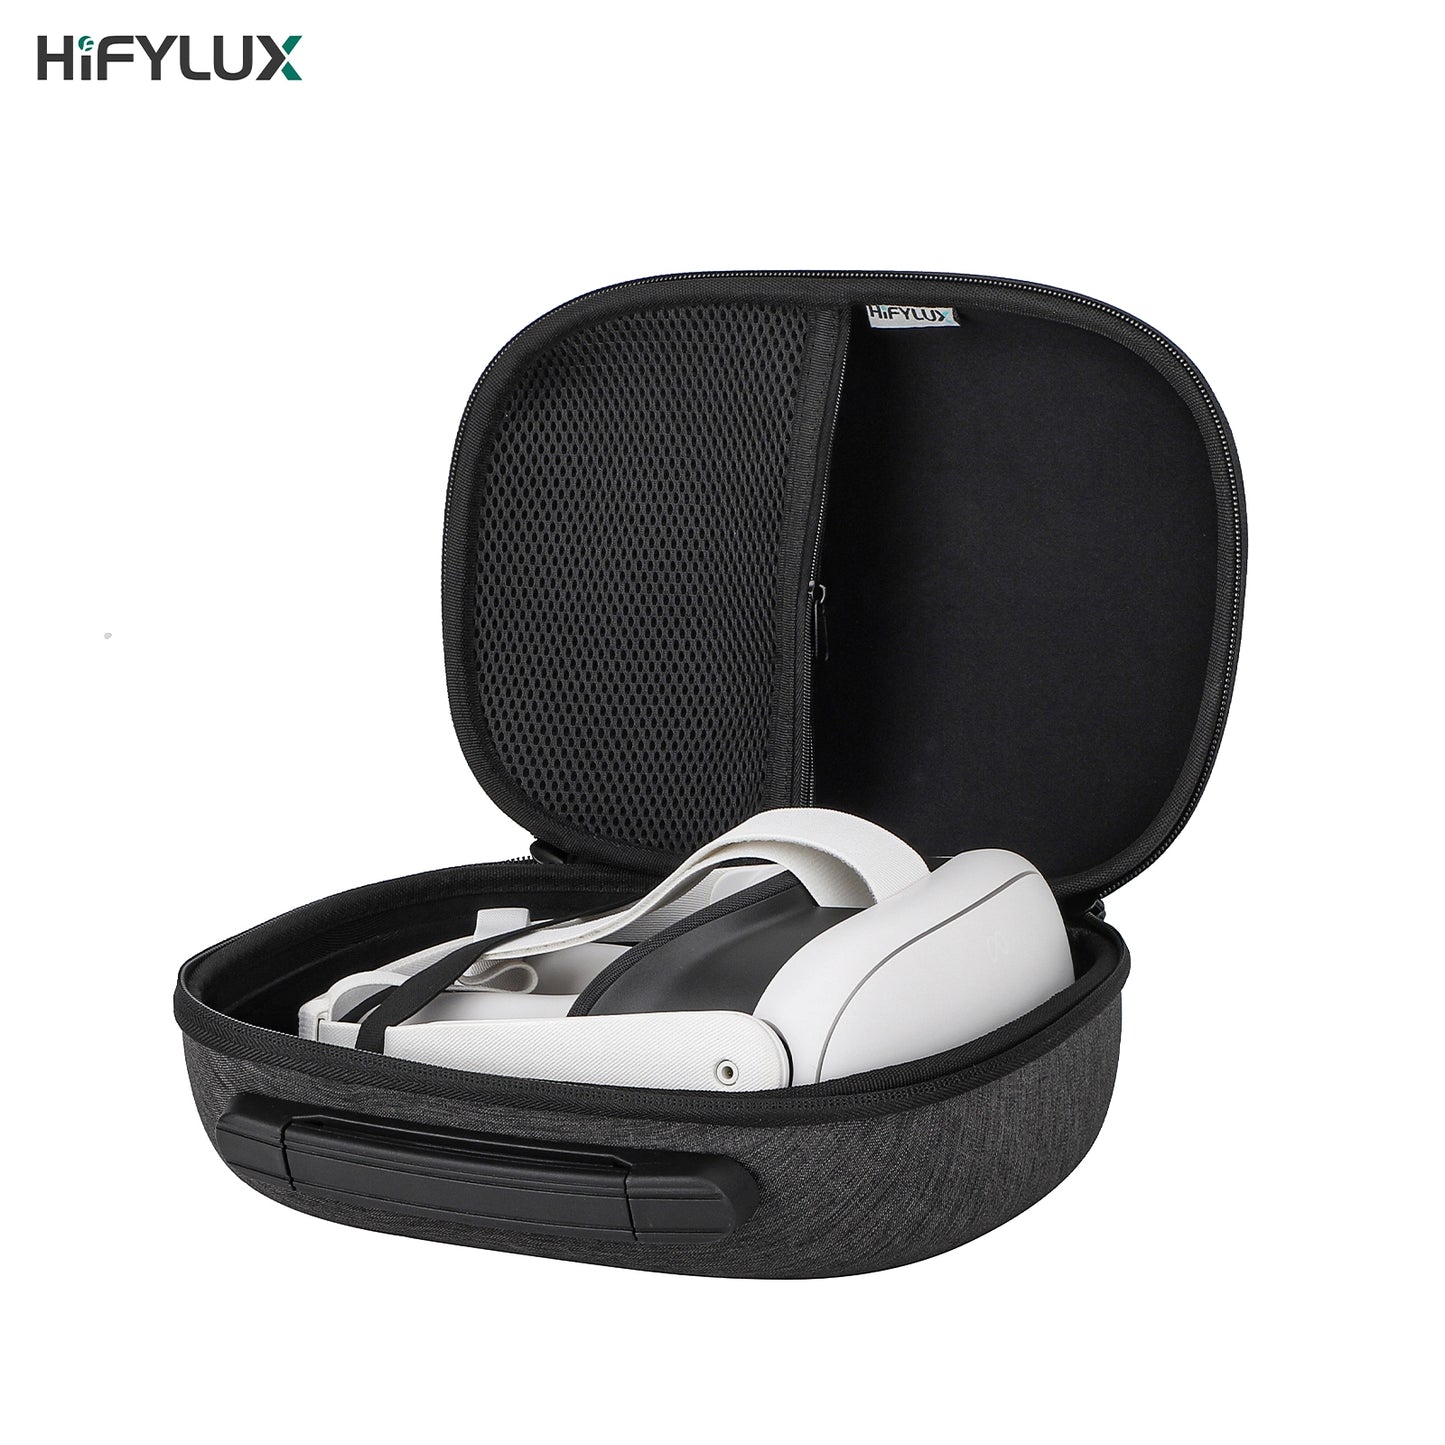 Hifylux Carrying Case for Meta Quest 3